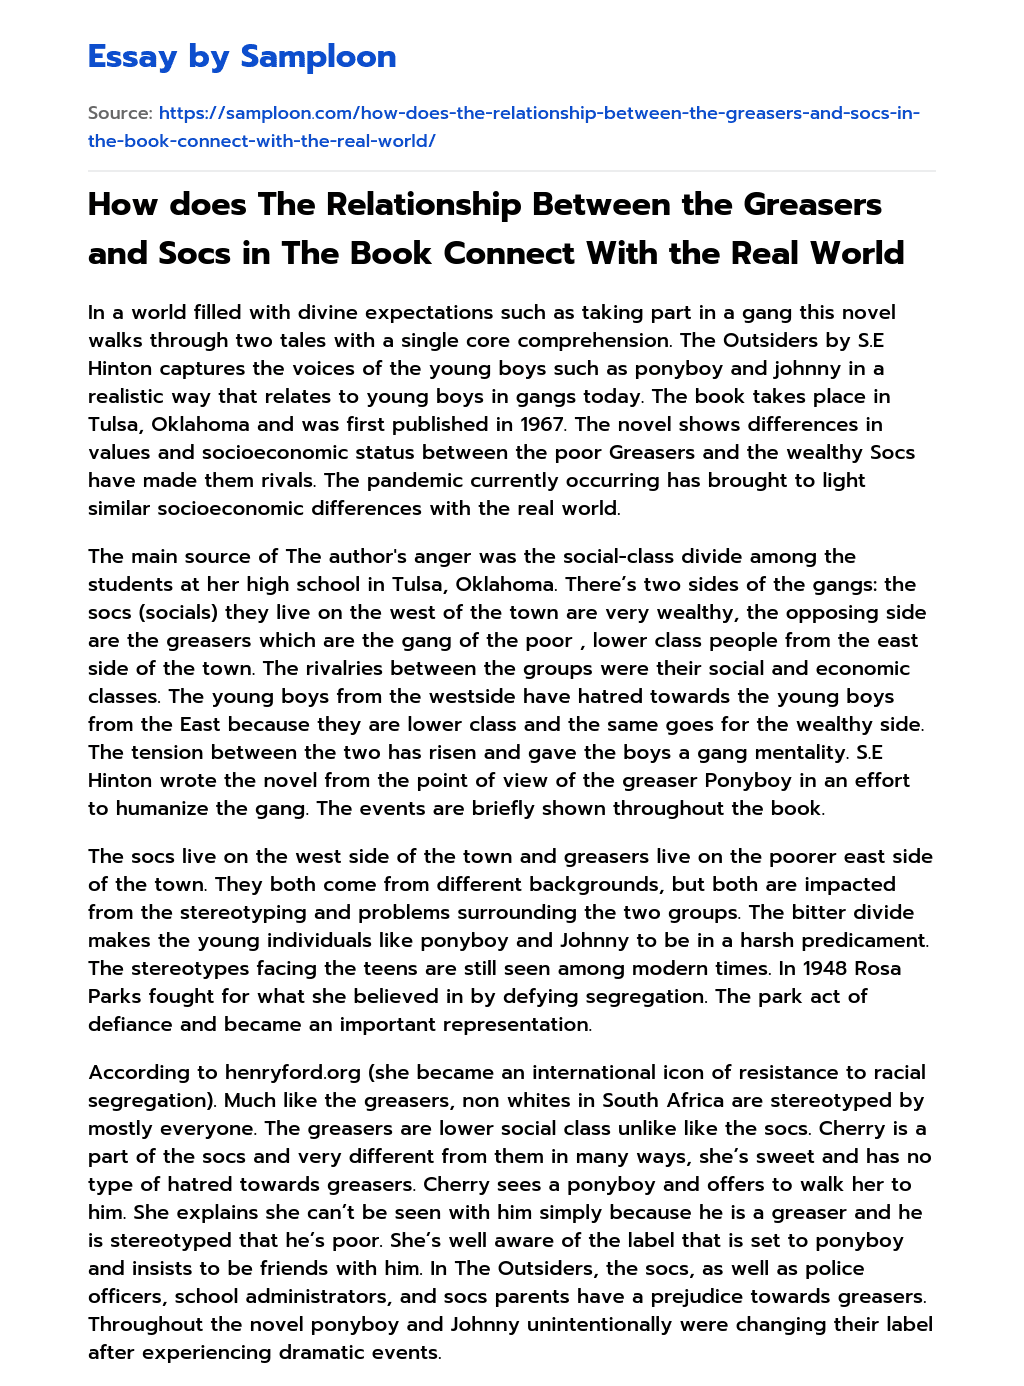 How does The Relationship Between the Greasers and Socs in The Book Connect With the Real World essay